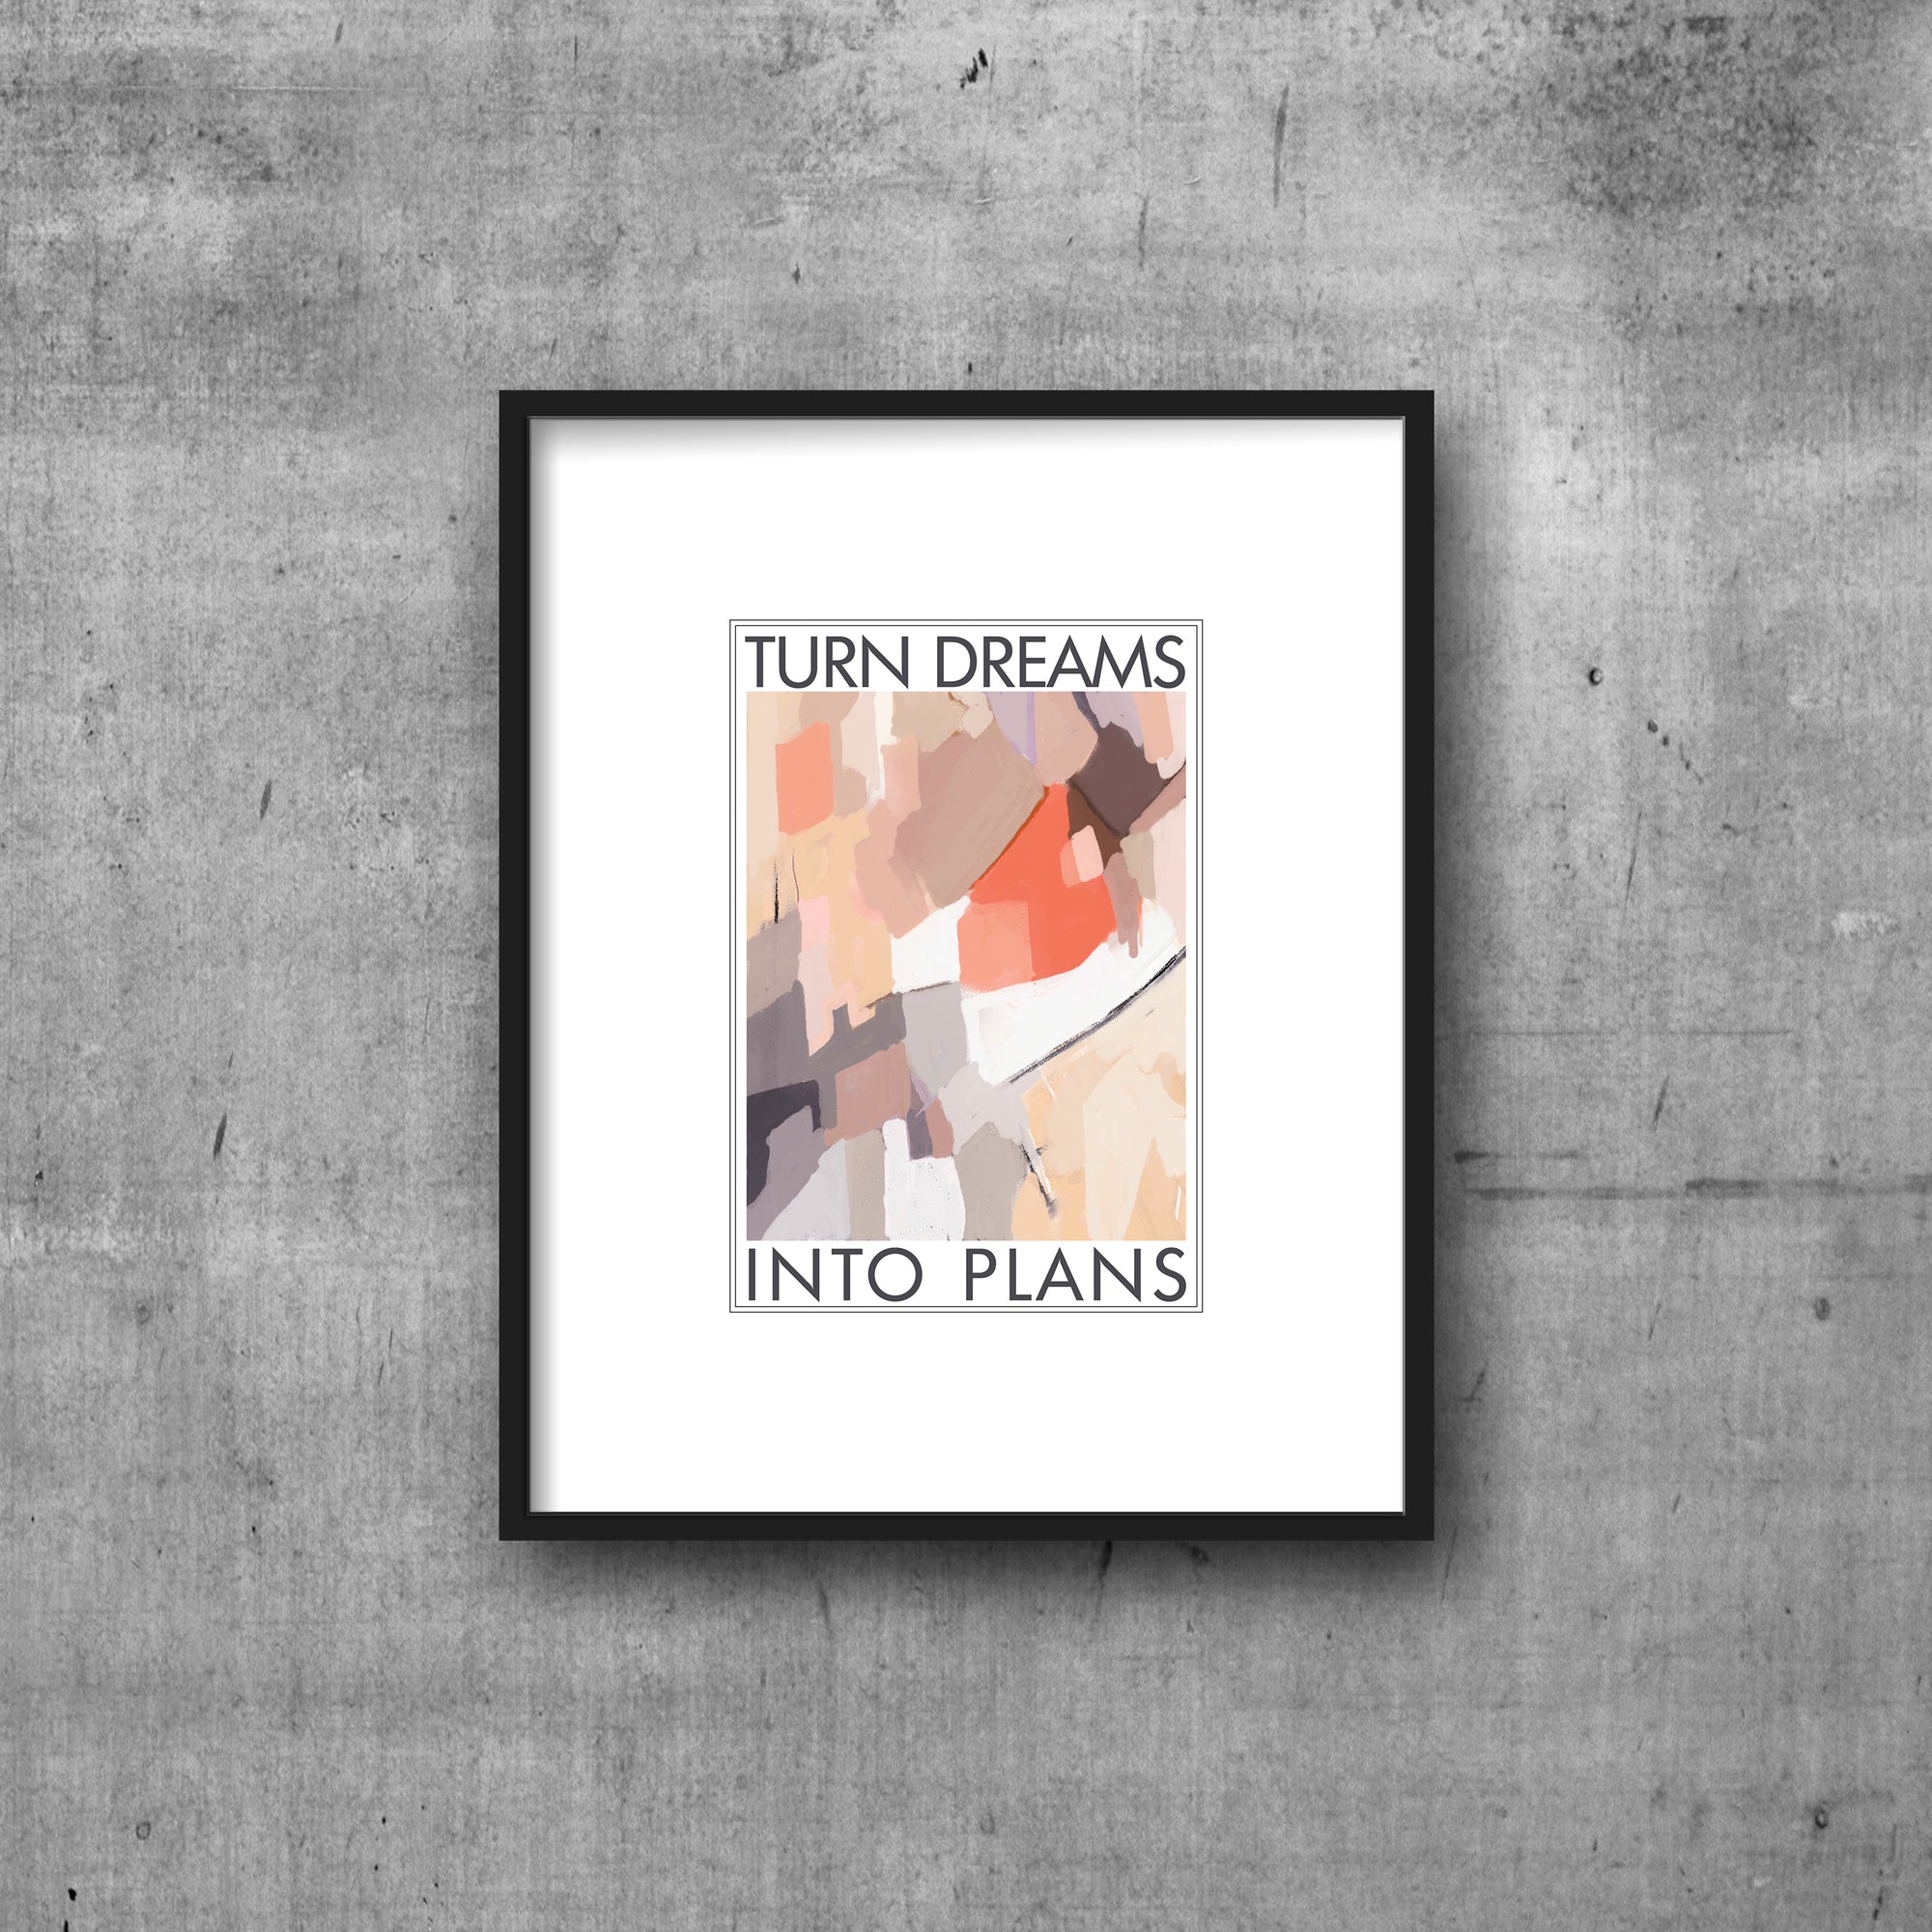 Art print with white border framing the text TURN DREAMS INTO PLANS and abstract art in shades of coral, tan lilac and mauve. Frame in black frame on cement wall.